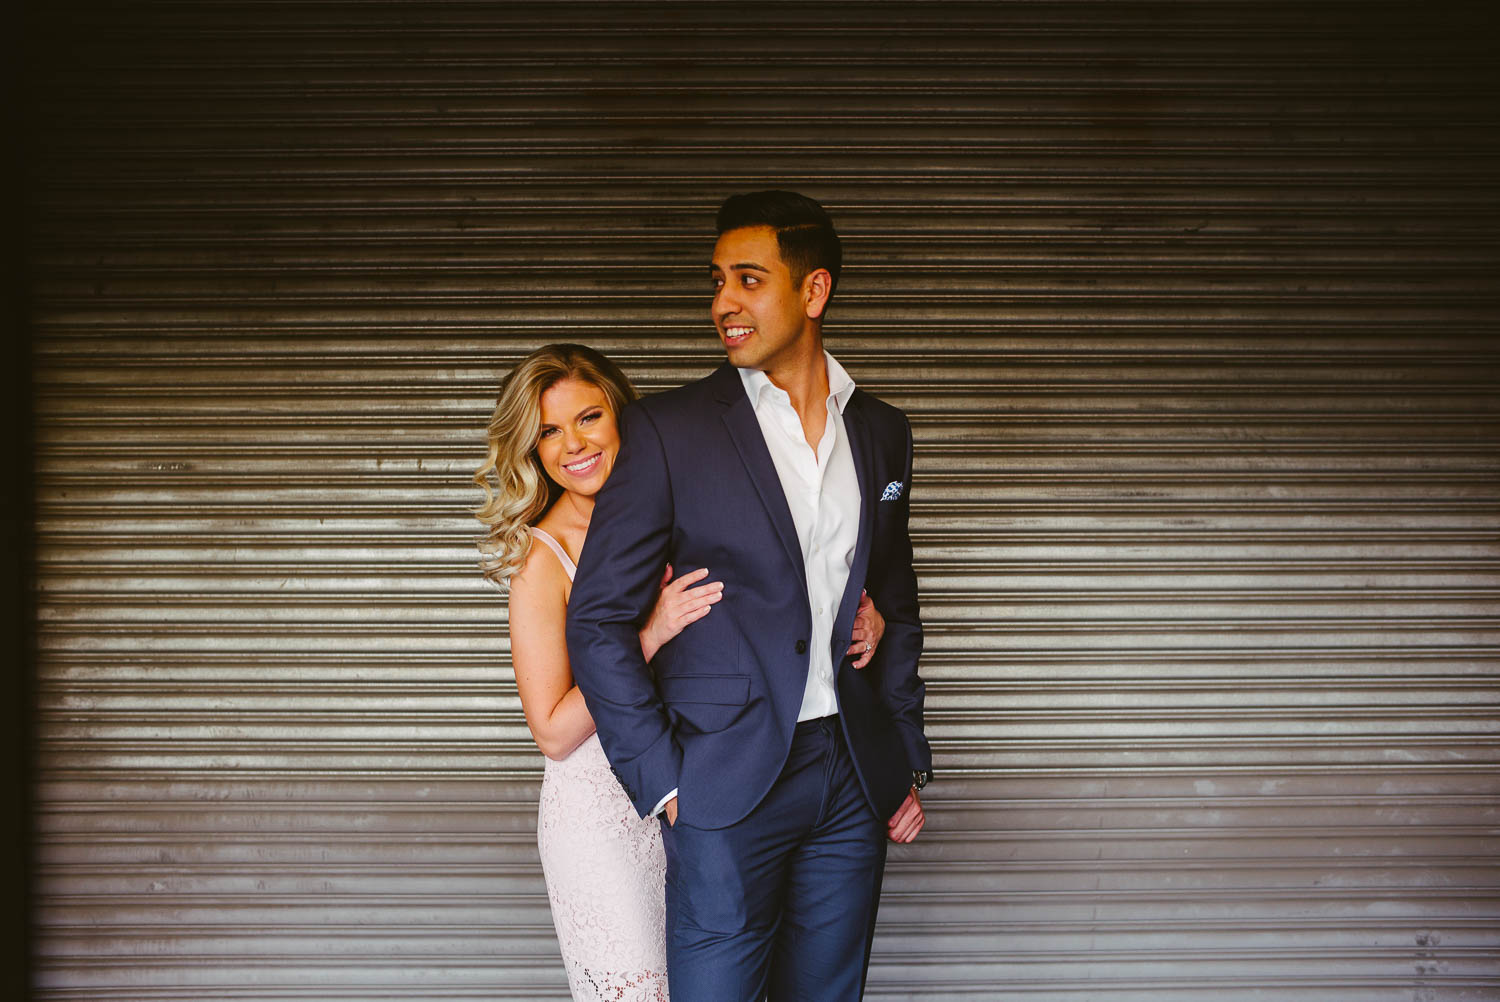 Couples engagement session downtown San Antonio against a loading dock